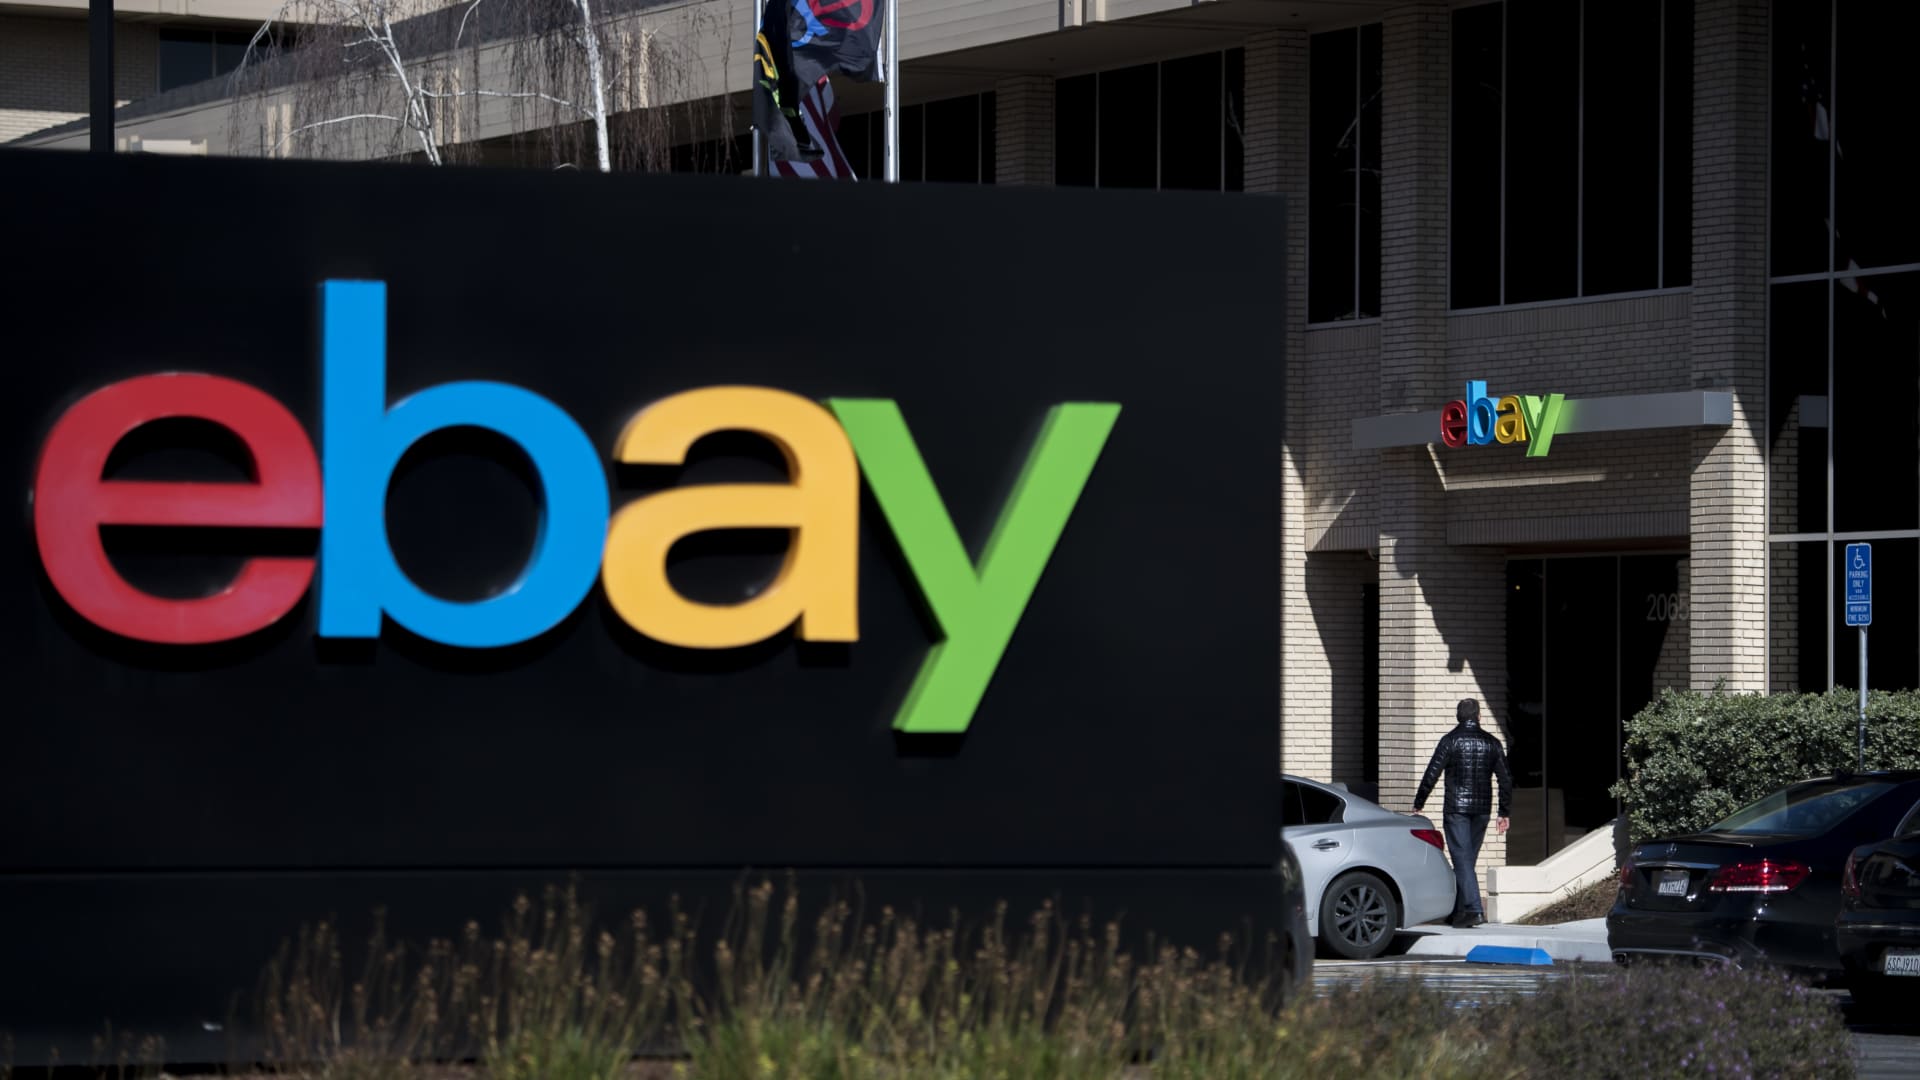 Former eBay executives given jail time for cyberstalking scheme